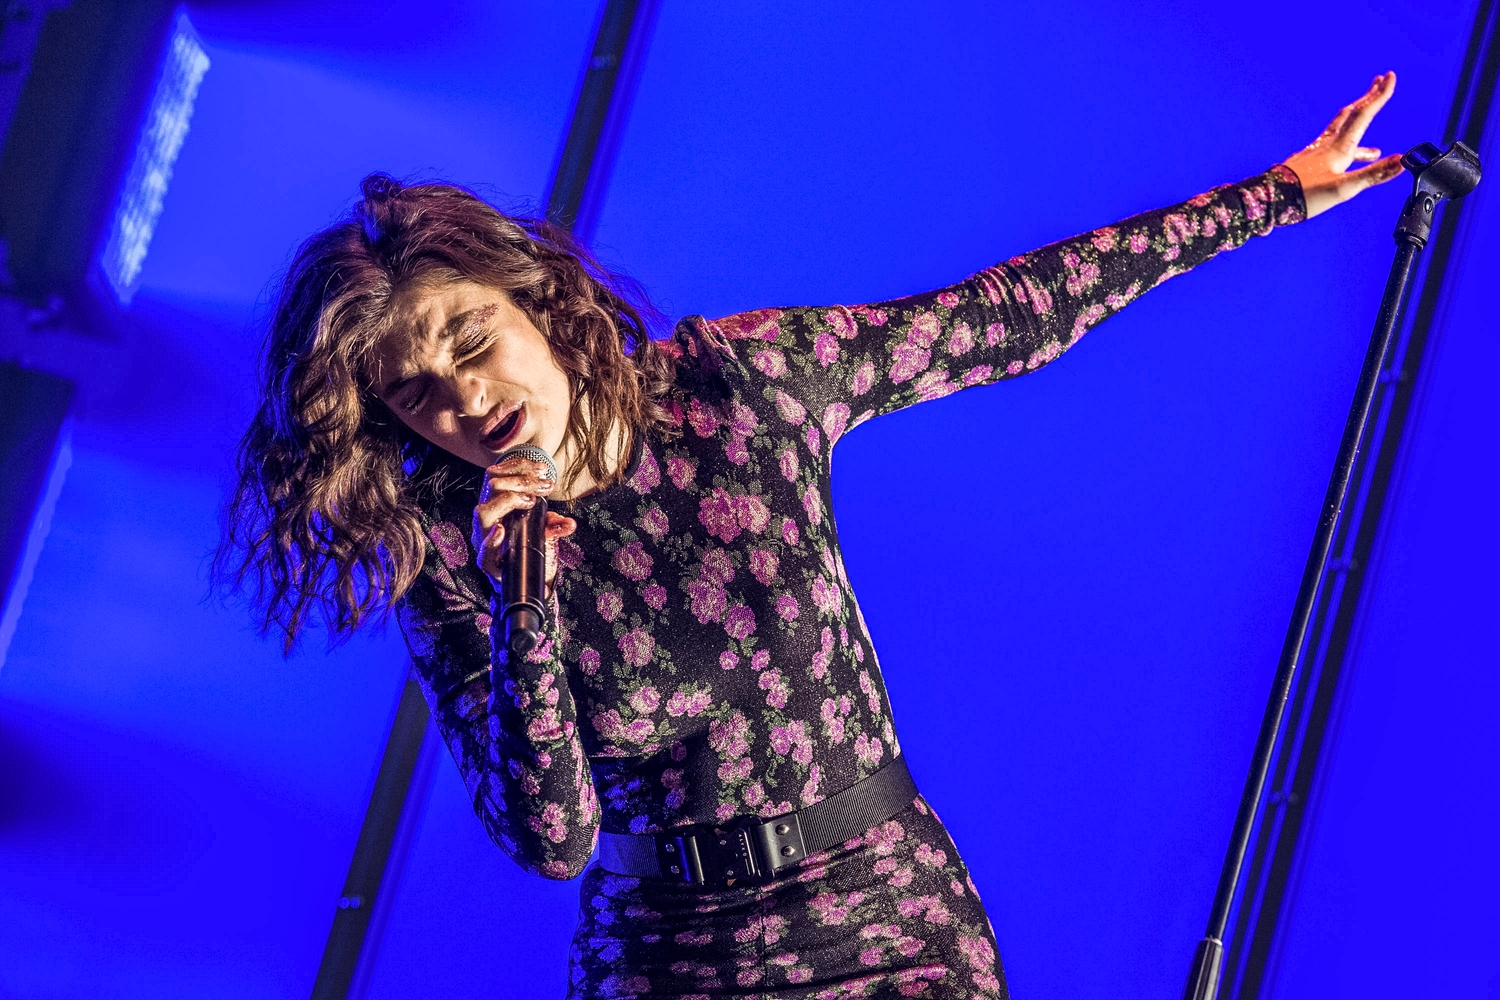 Lorde teases new music with ‘Solar Power’ artwork